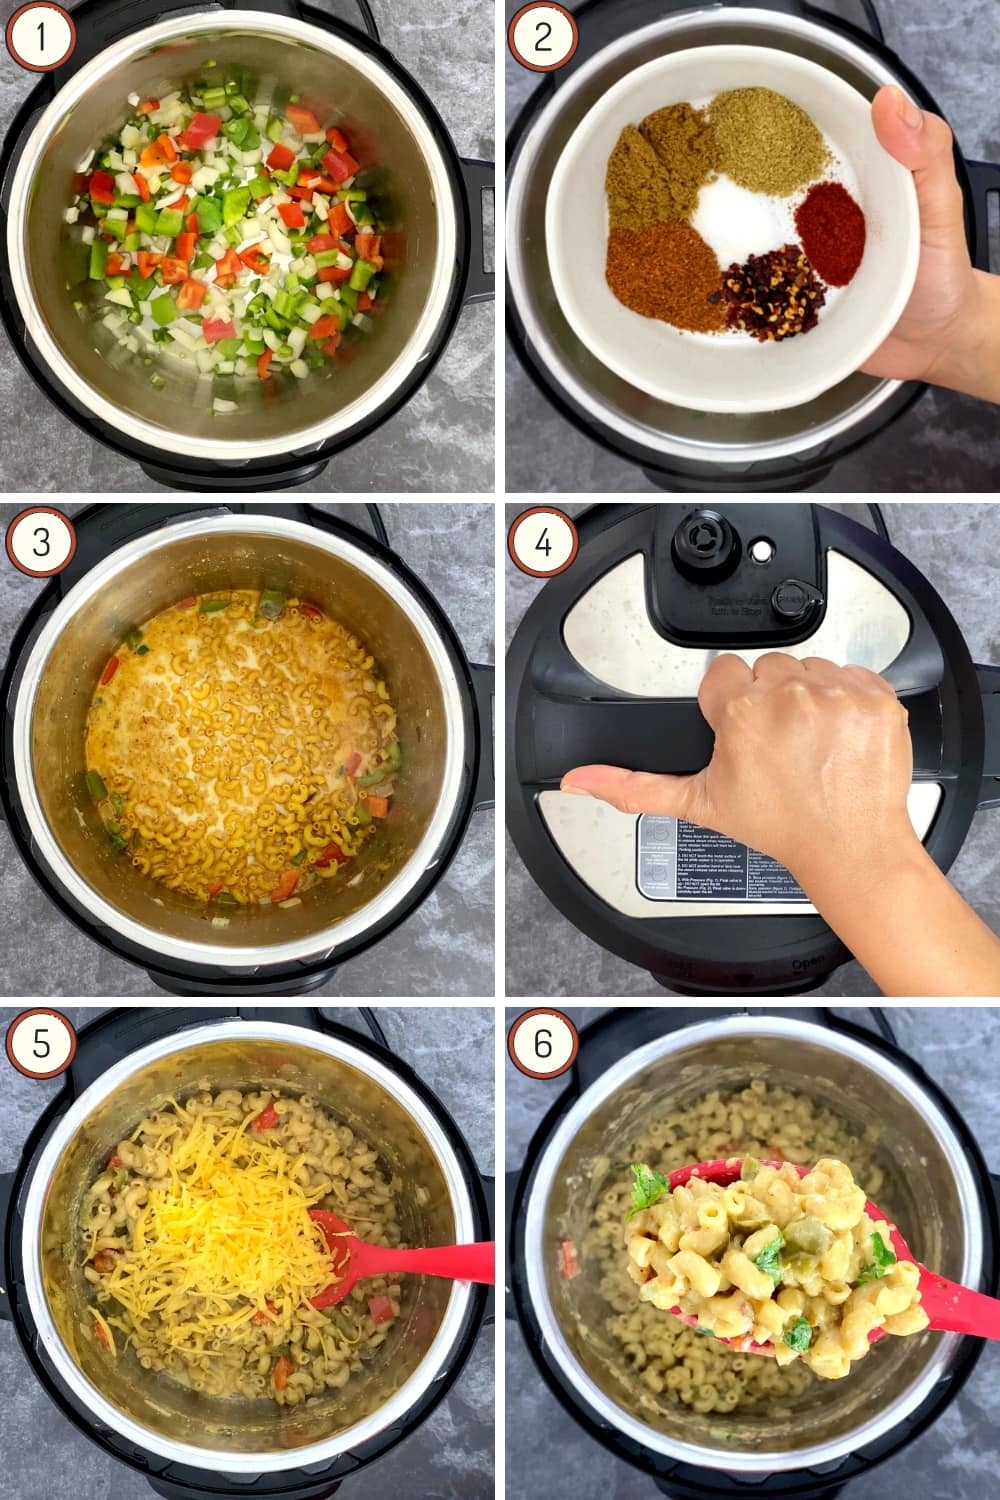 Step by step instructions for making spicy mac and cheese in the Instant Pot